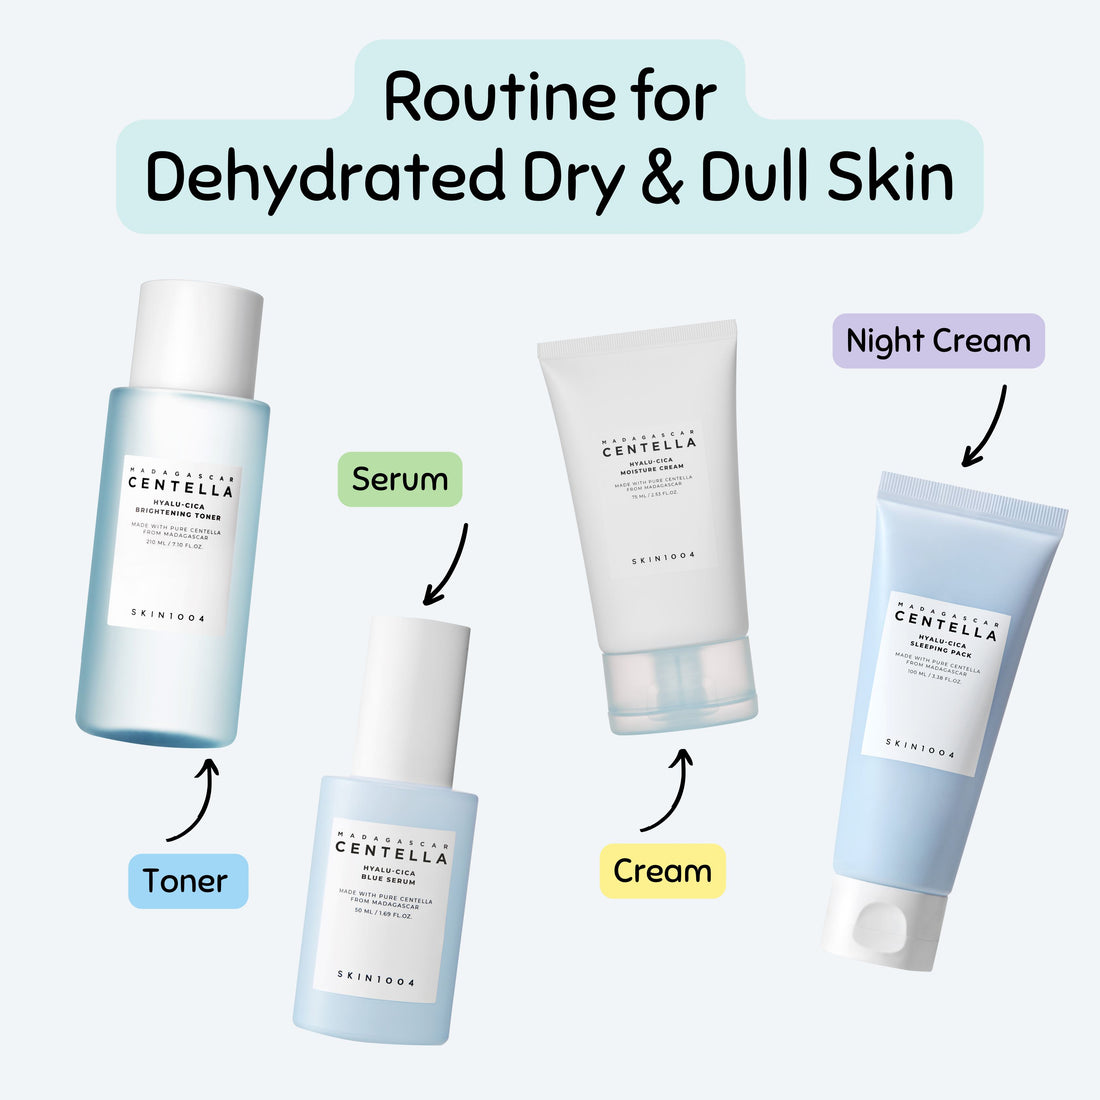 SKIN1004 Routine for Dehydrated Dry and Dull Skin (With Sleeping Mask) Skin Care SKIN1004 ORION XO Sri Lanka